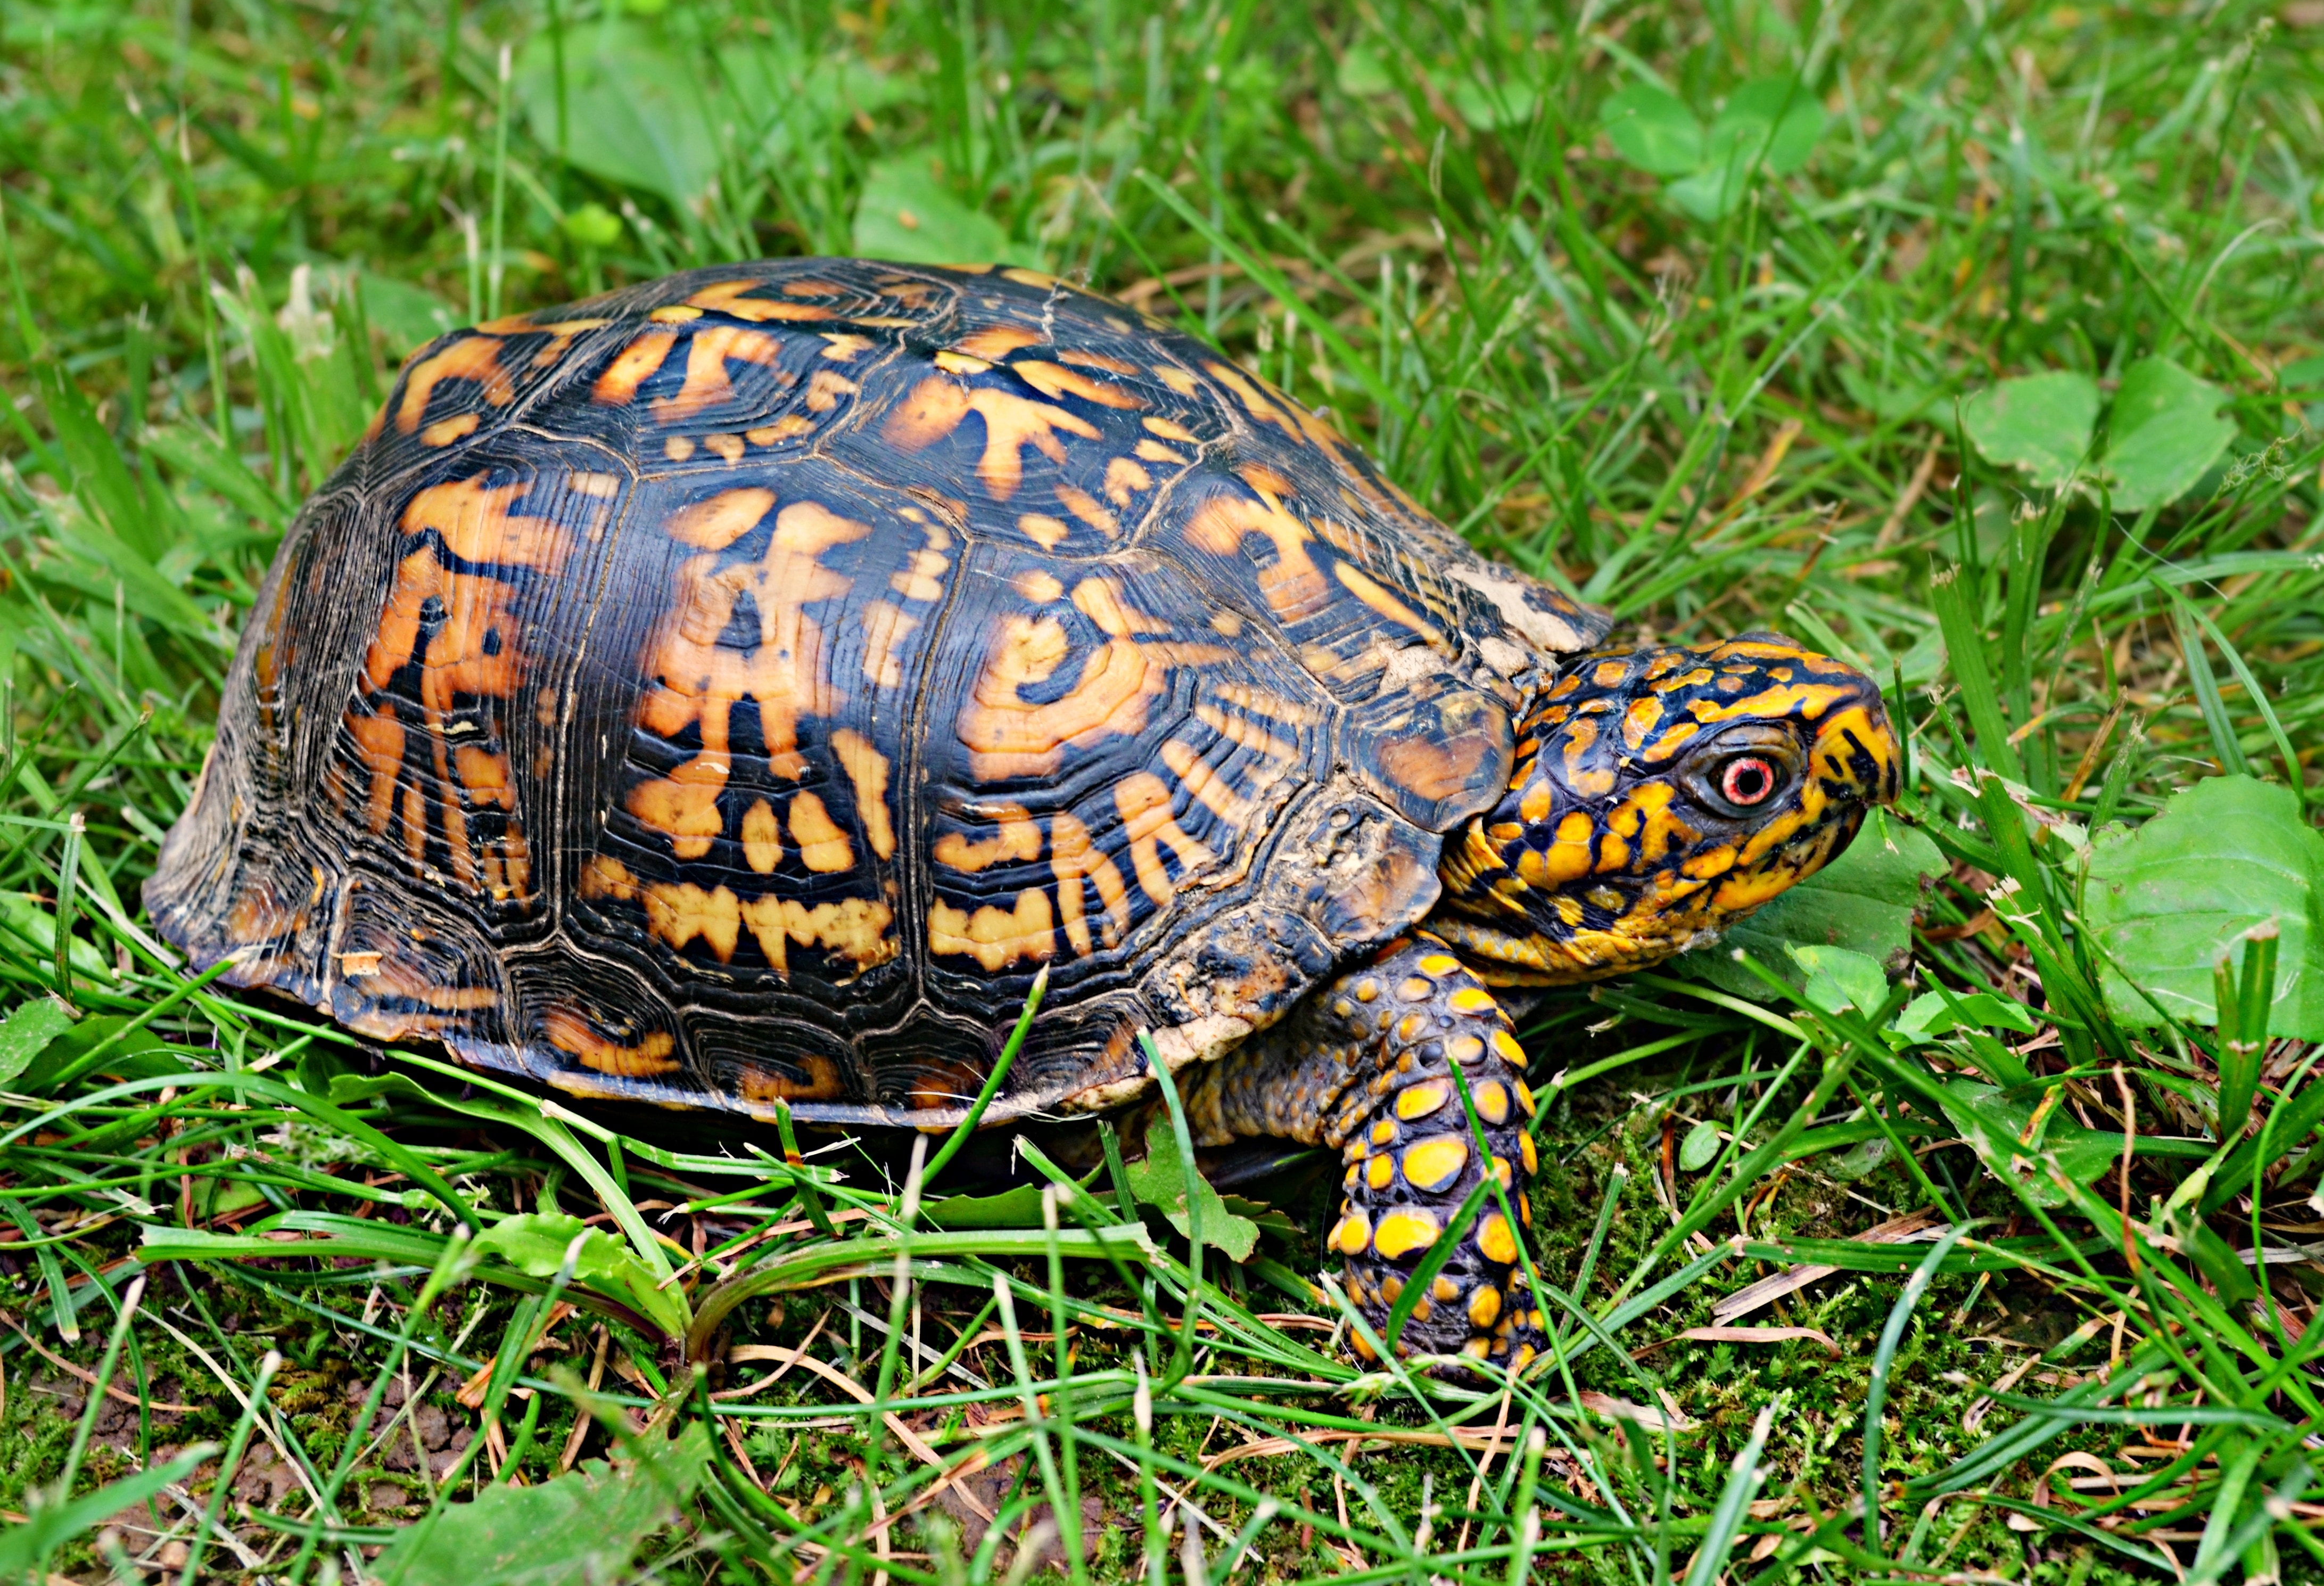 turtle crawling on ground with grass